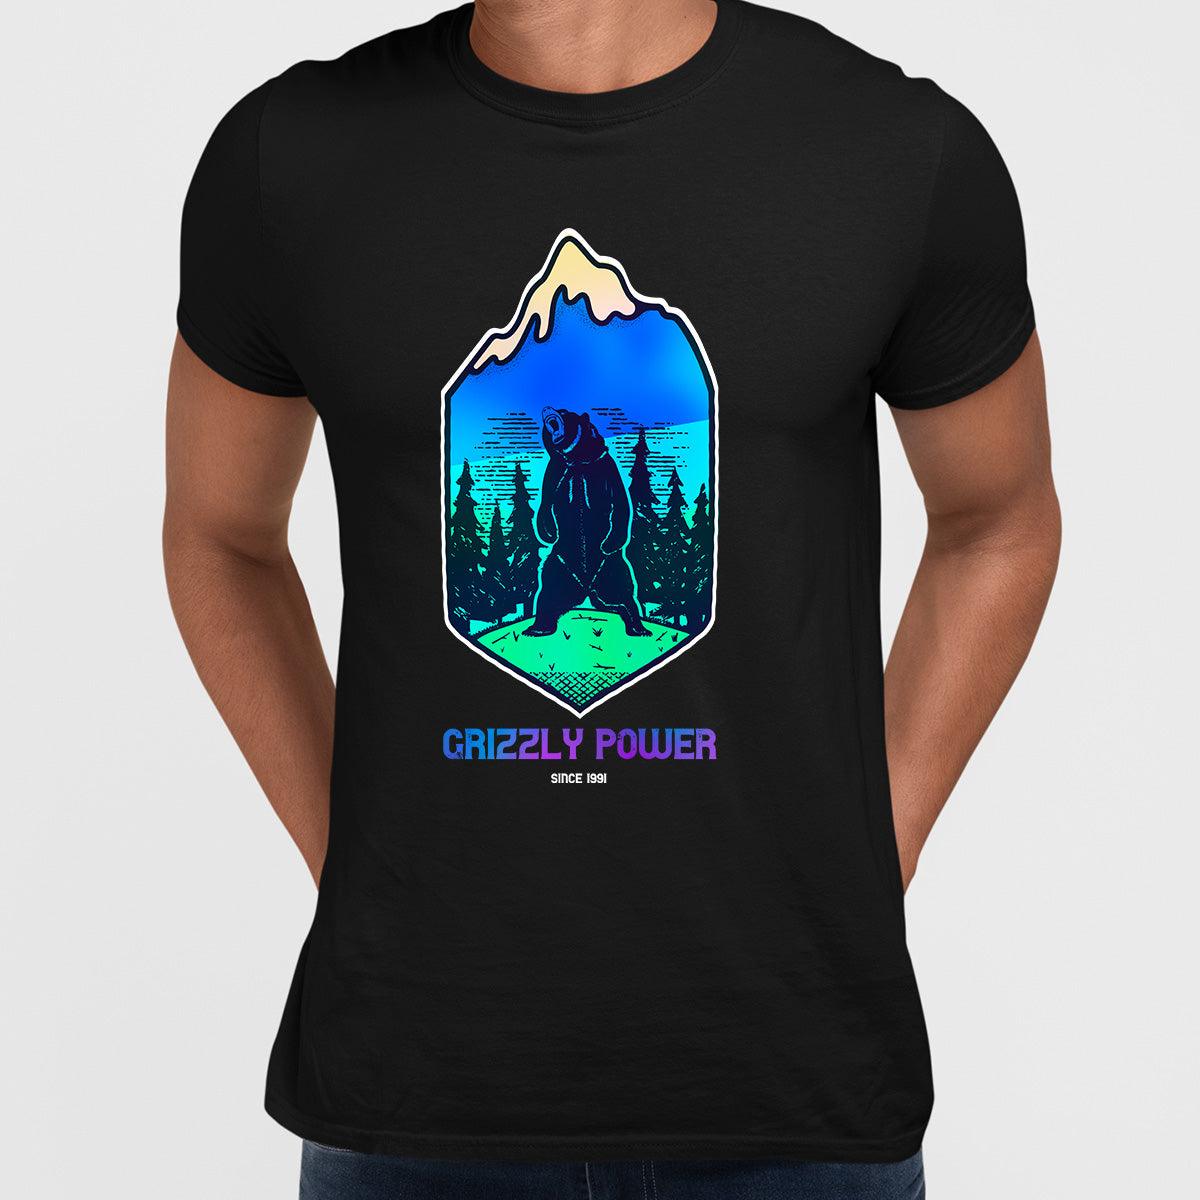 Grizzly Power - Since 1991 - Great Outdoor T-shirt - Kuzi Tees